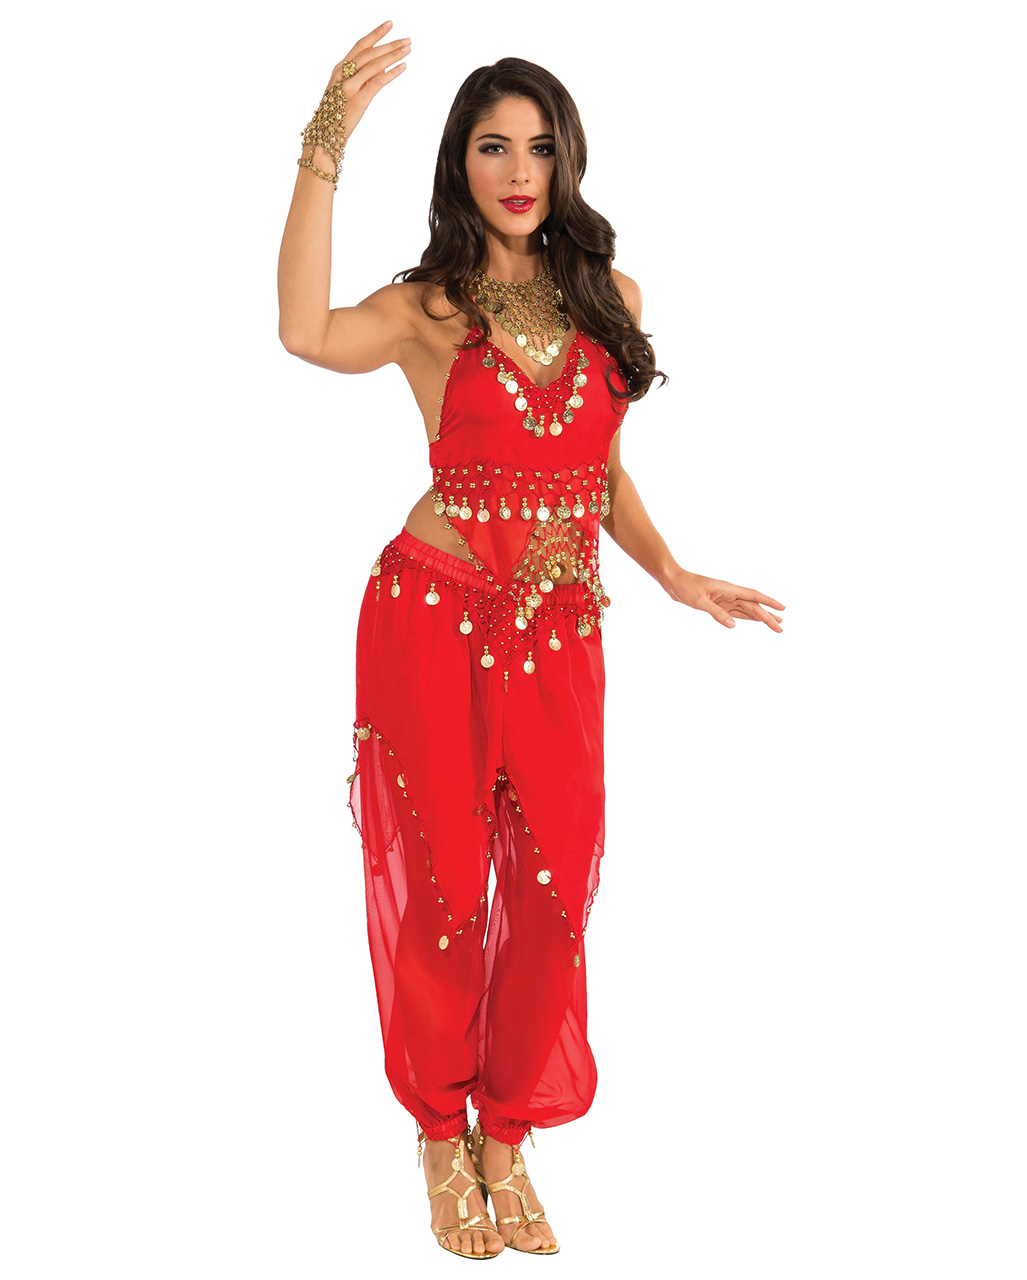 Oriental Belly Dance Costume In Red With Coins Horror